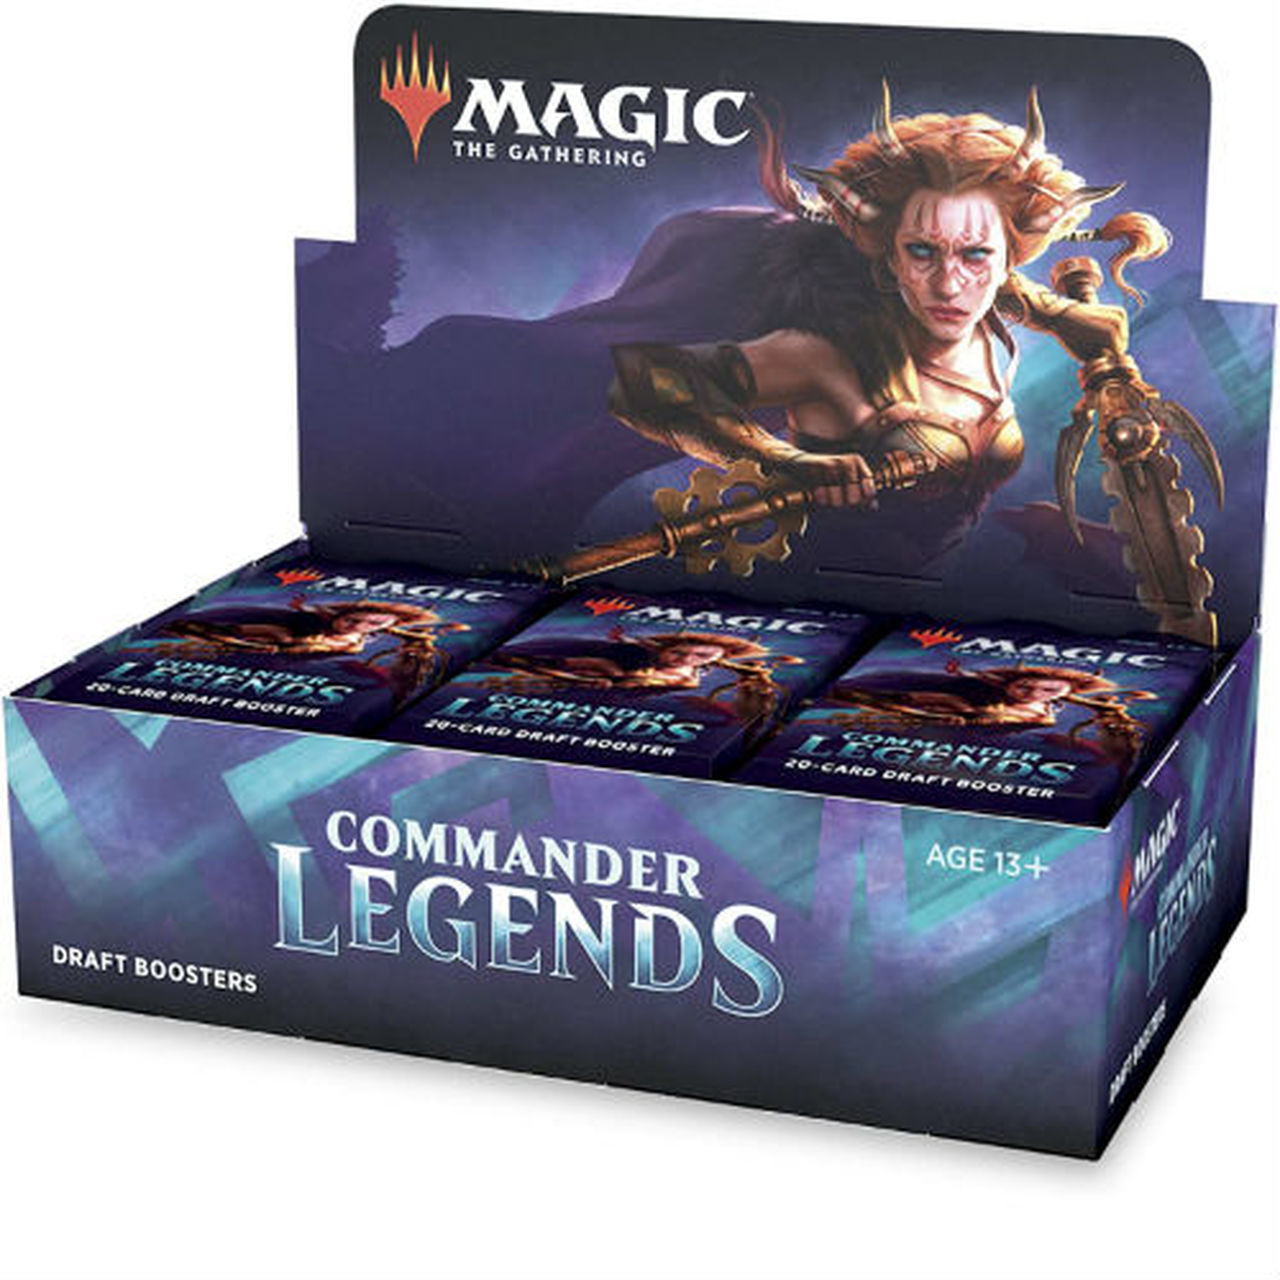 Magic the Gathering Commander Legends Sealed Booster Box Decked Out